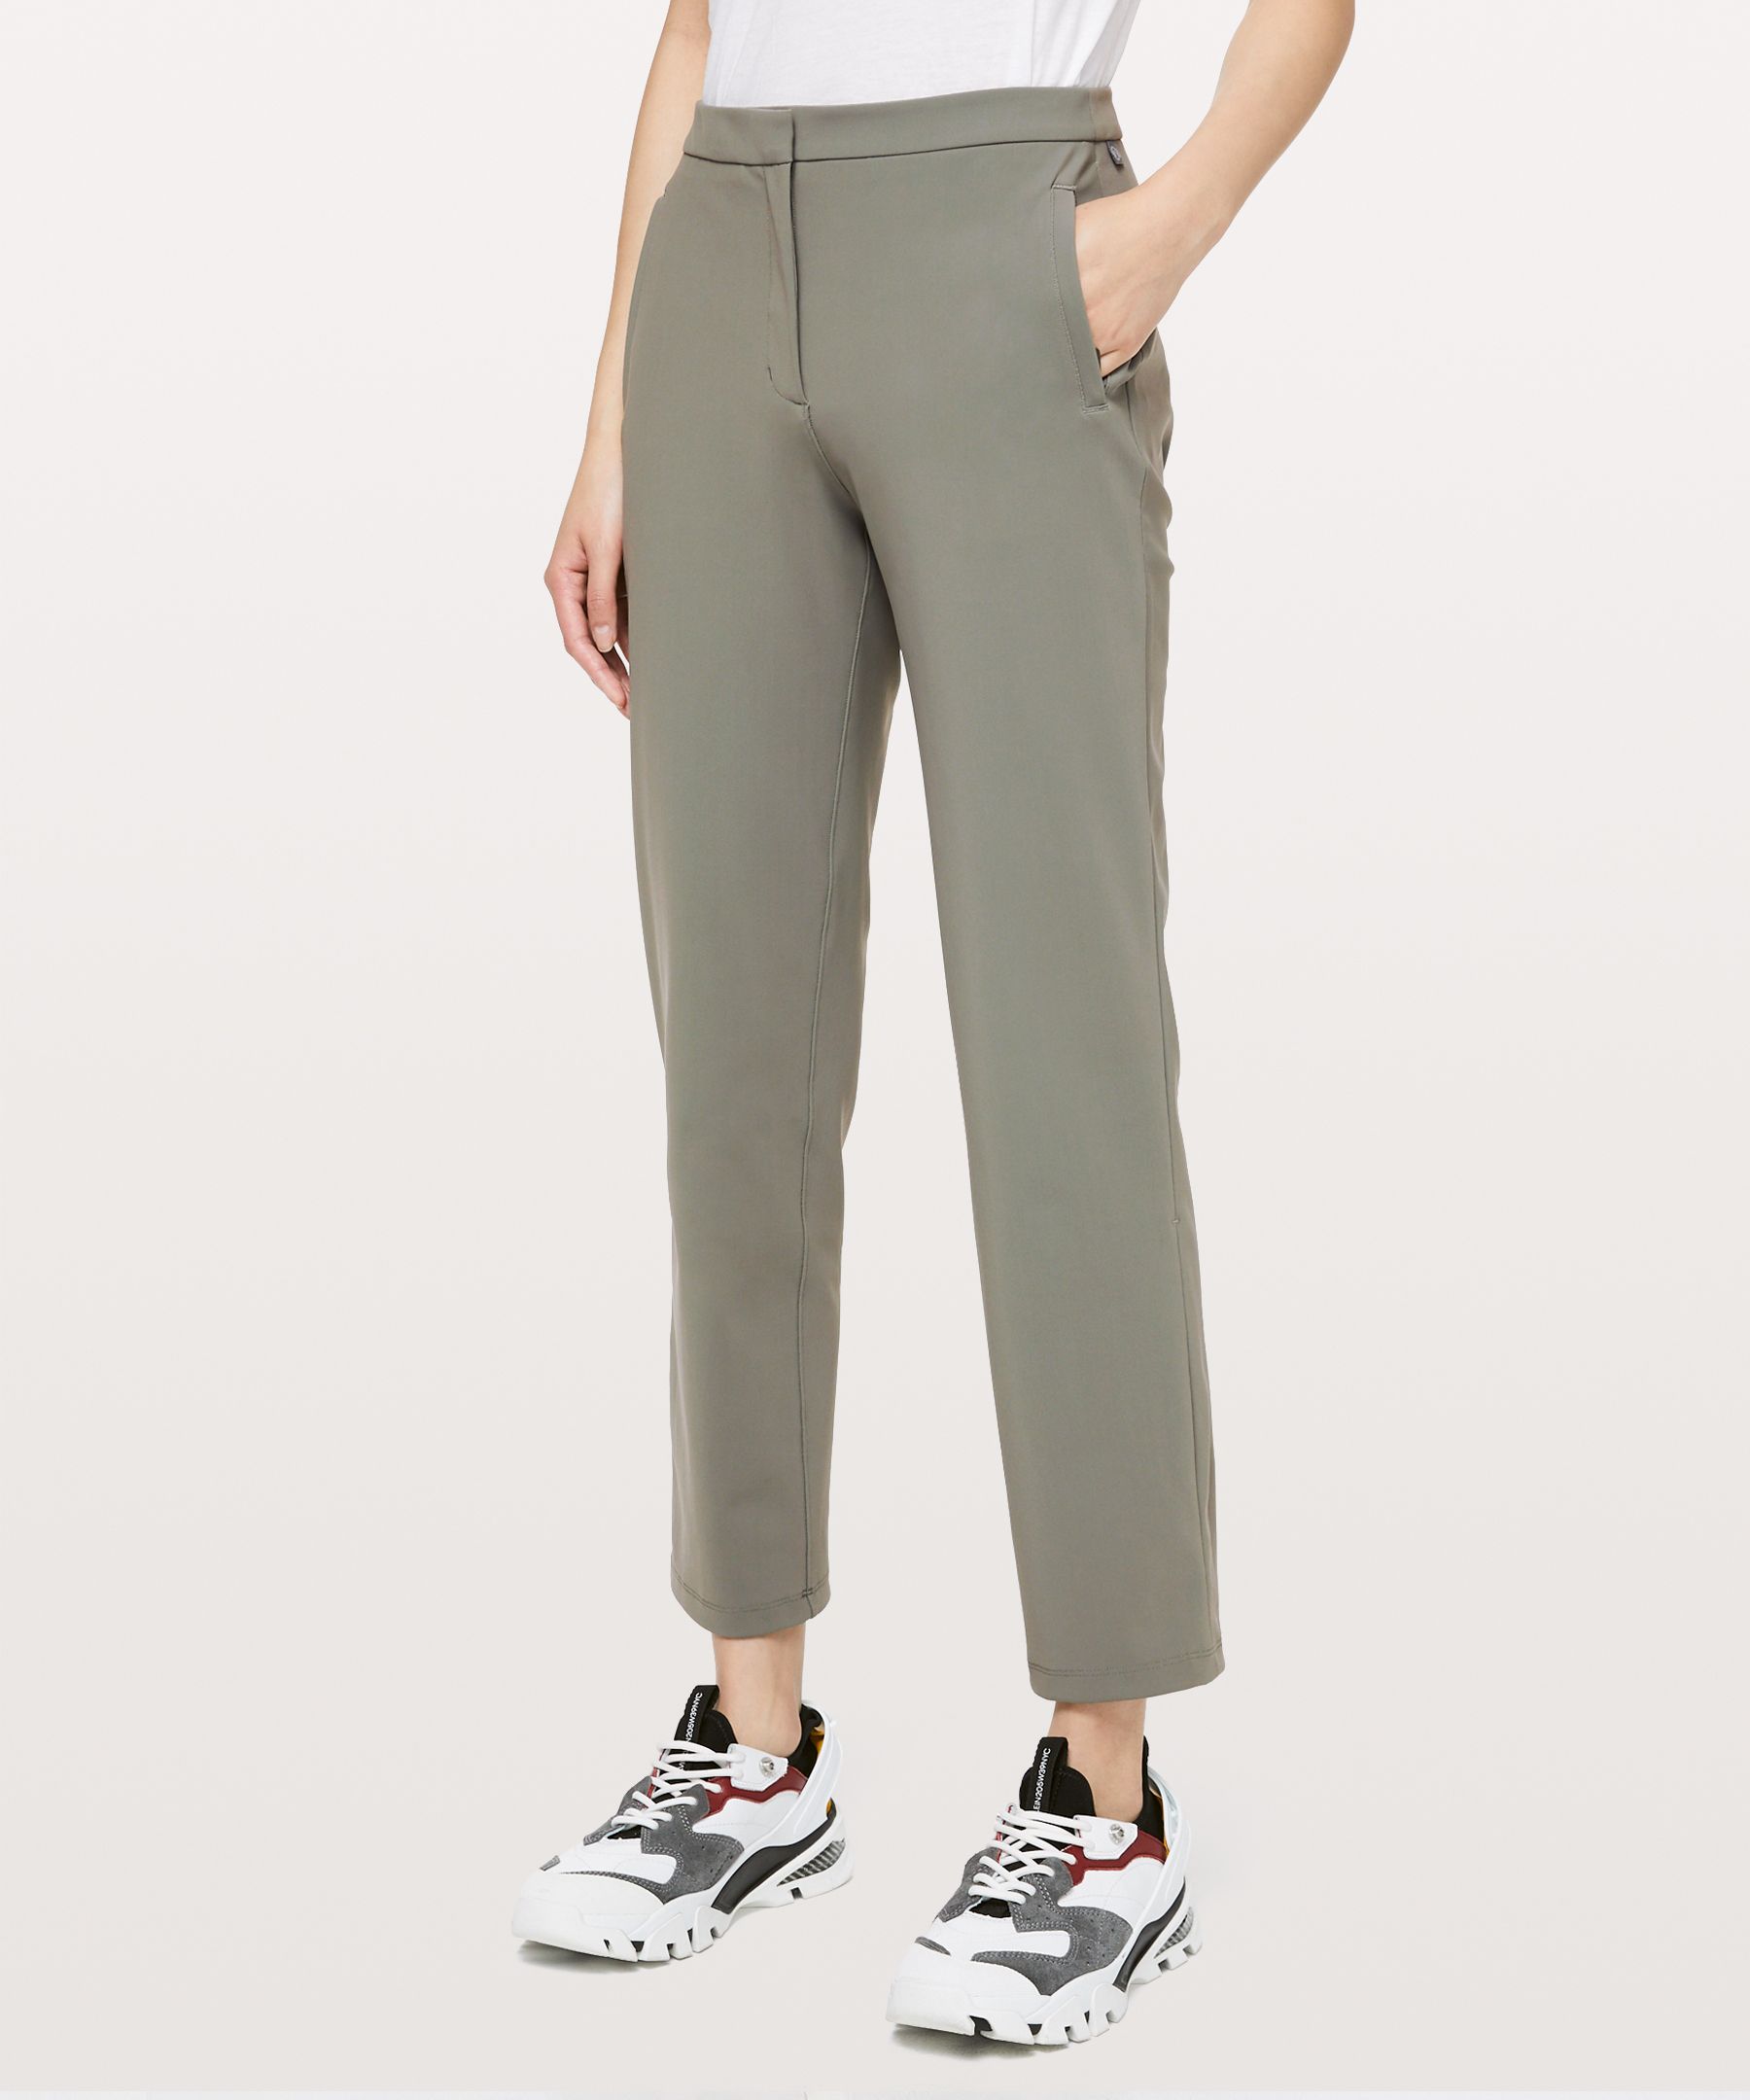 on the move pant lululemon review